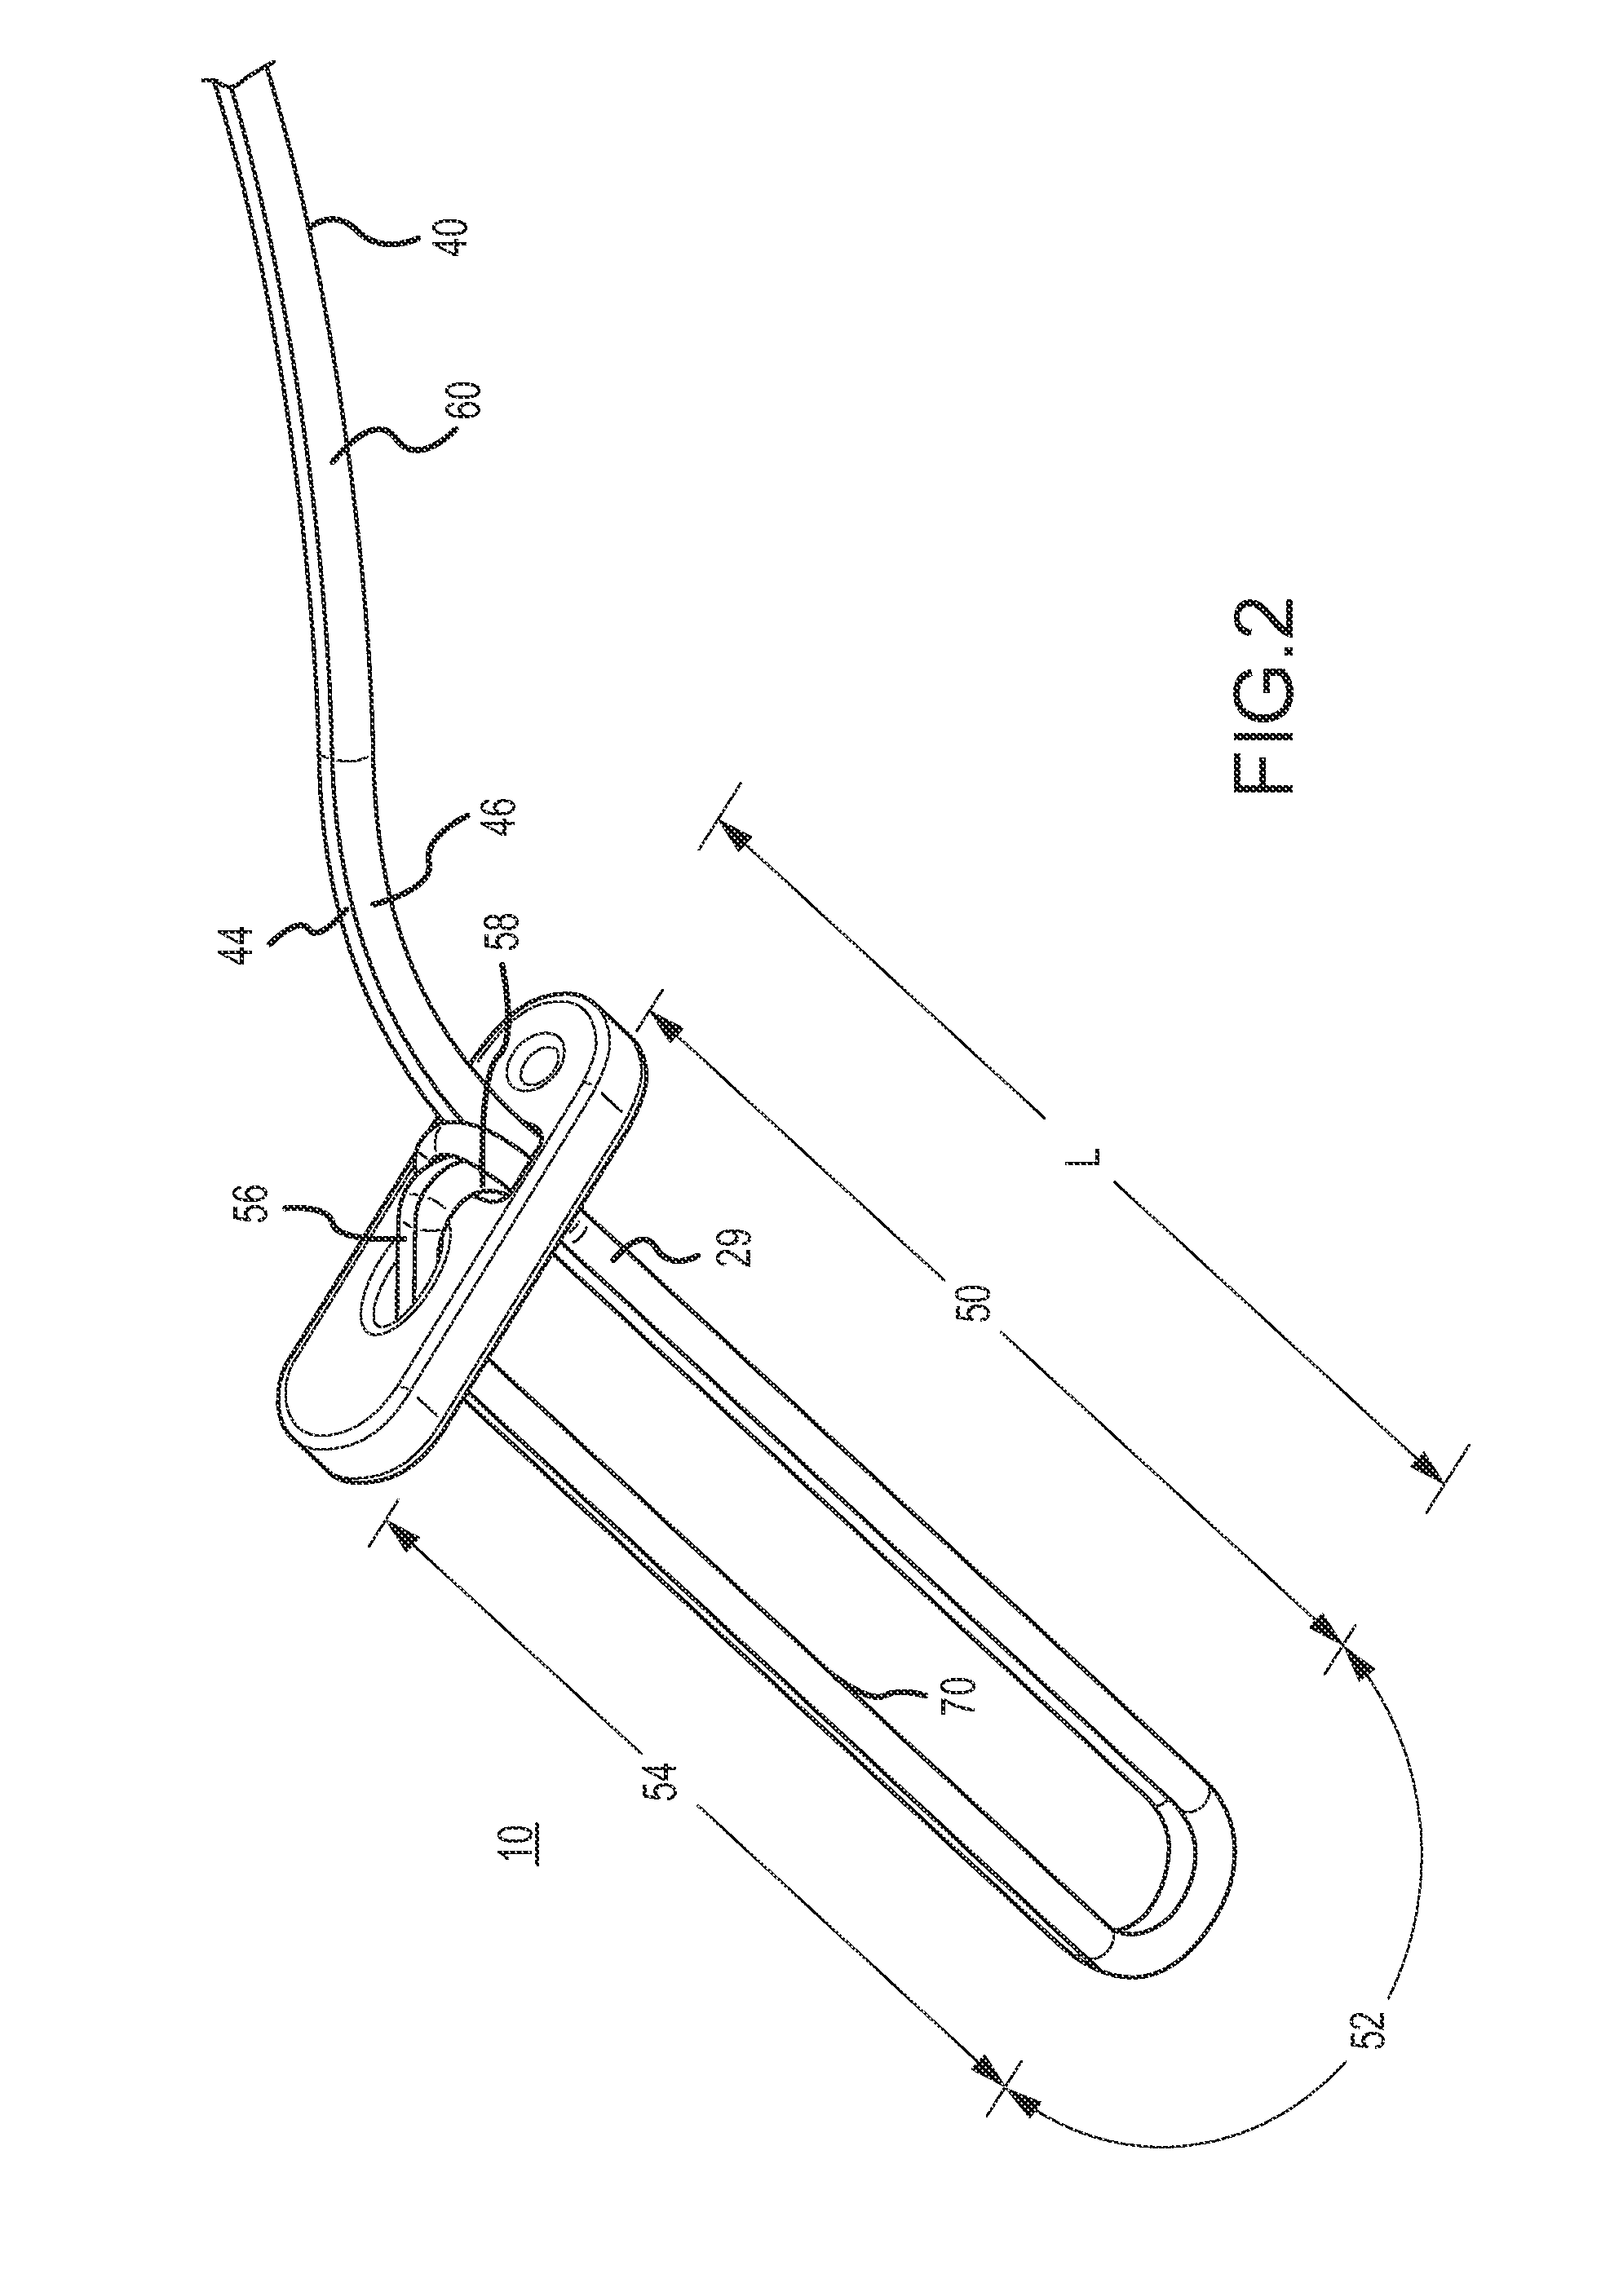 Suspensory graft fixation with adjustable loop length